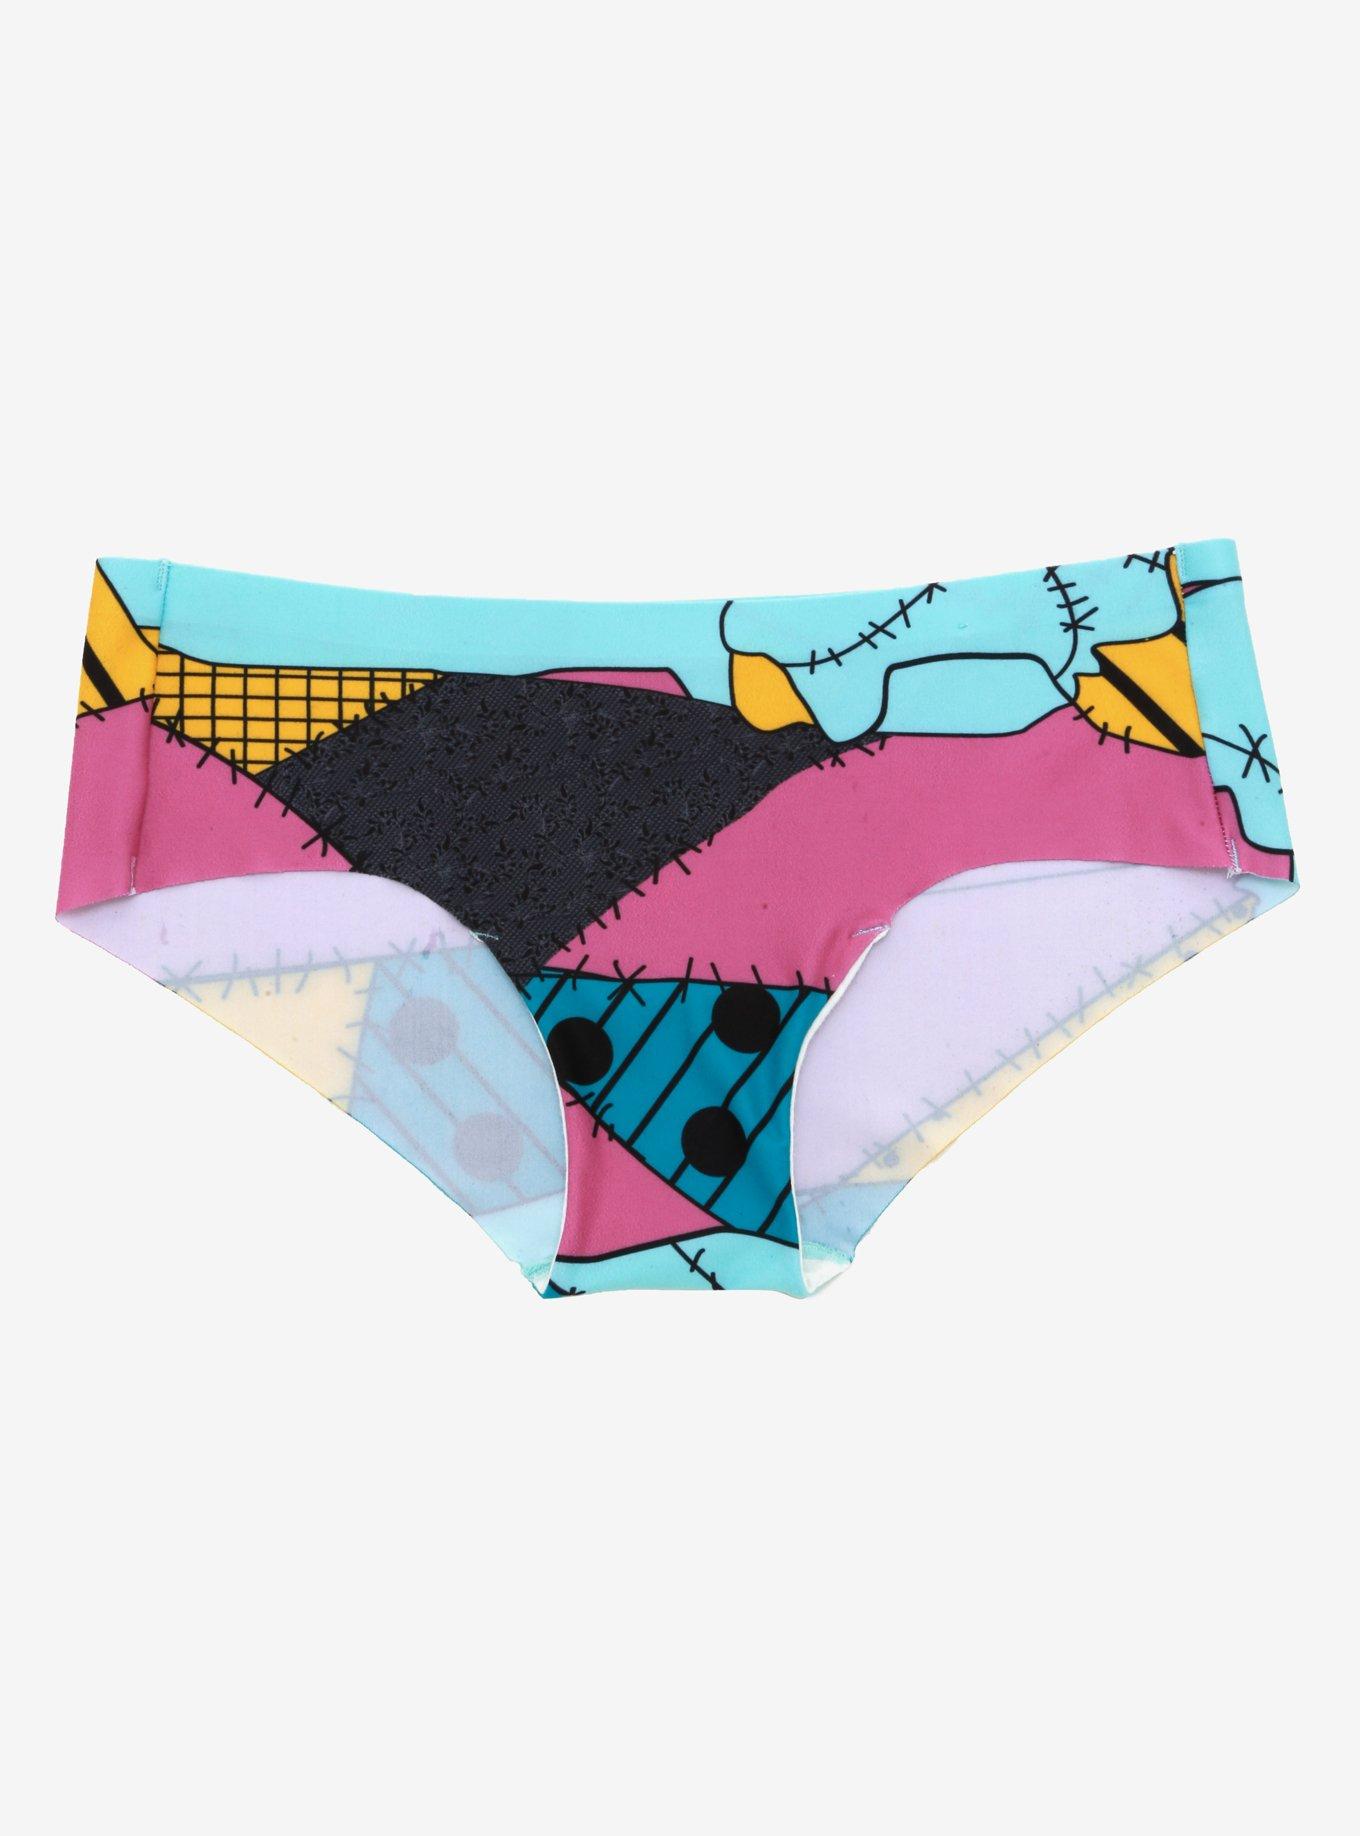 NWT DC COMICS SUICIDE SQUAD HARLEY QUINN HIPSTER UNDERWEAR PANTY Large NEW 7